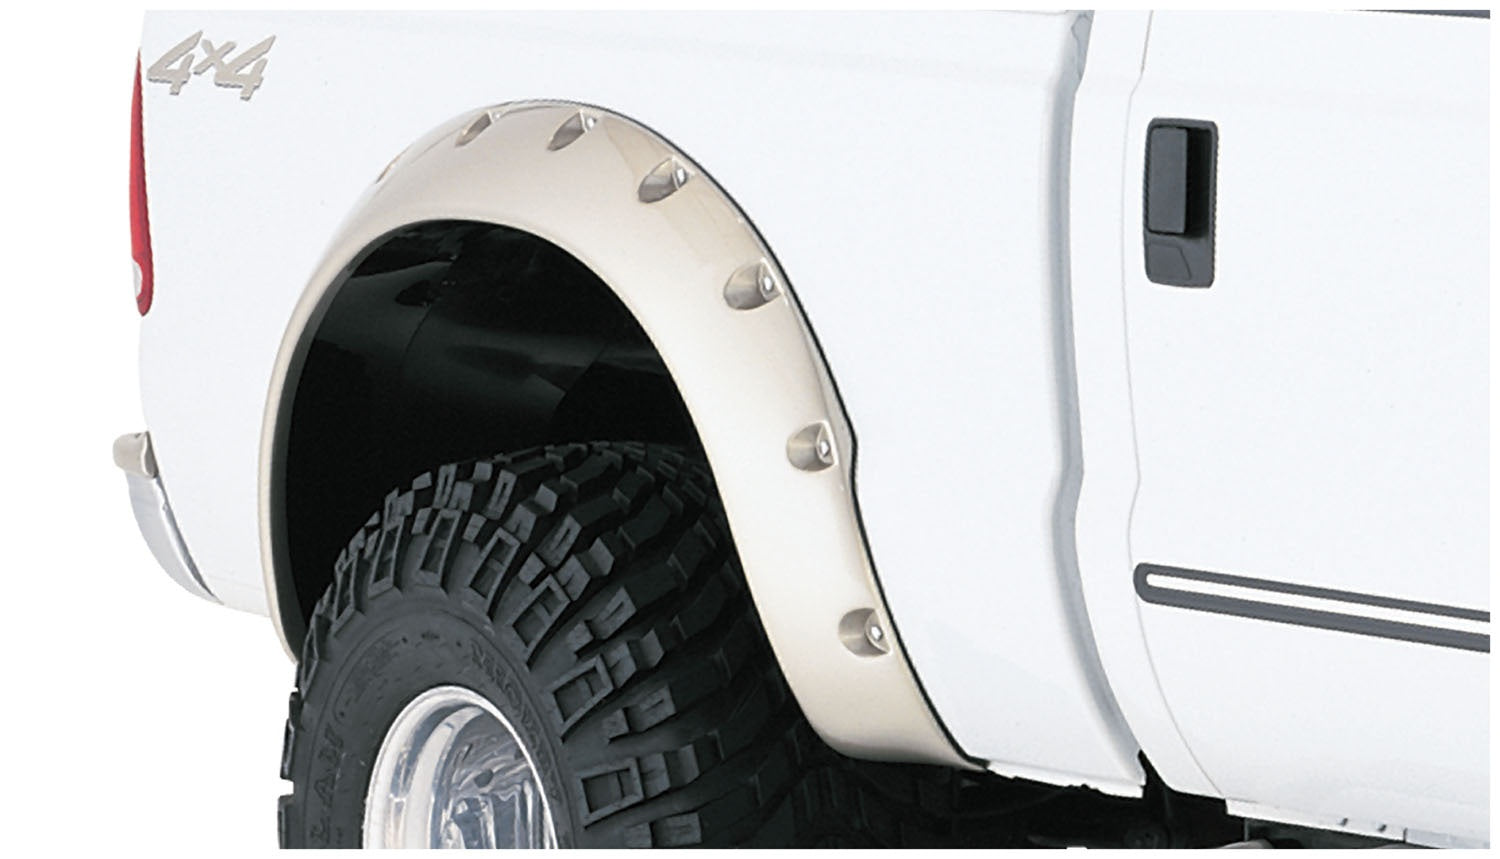 Bushwacker 20044-02 Black Cutout Style Smooth Finish Rear Fender Flares for 1999-2010 Ford F-250 & F-350 Super Duty (Excludes Dually) | Fits 81 & 82.4 in. Bed